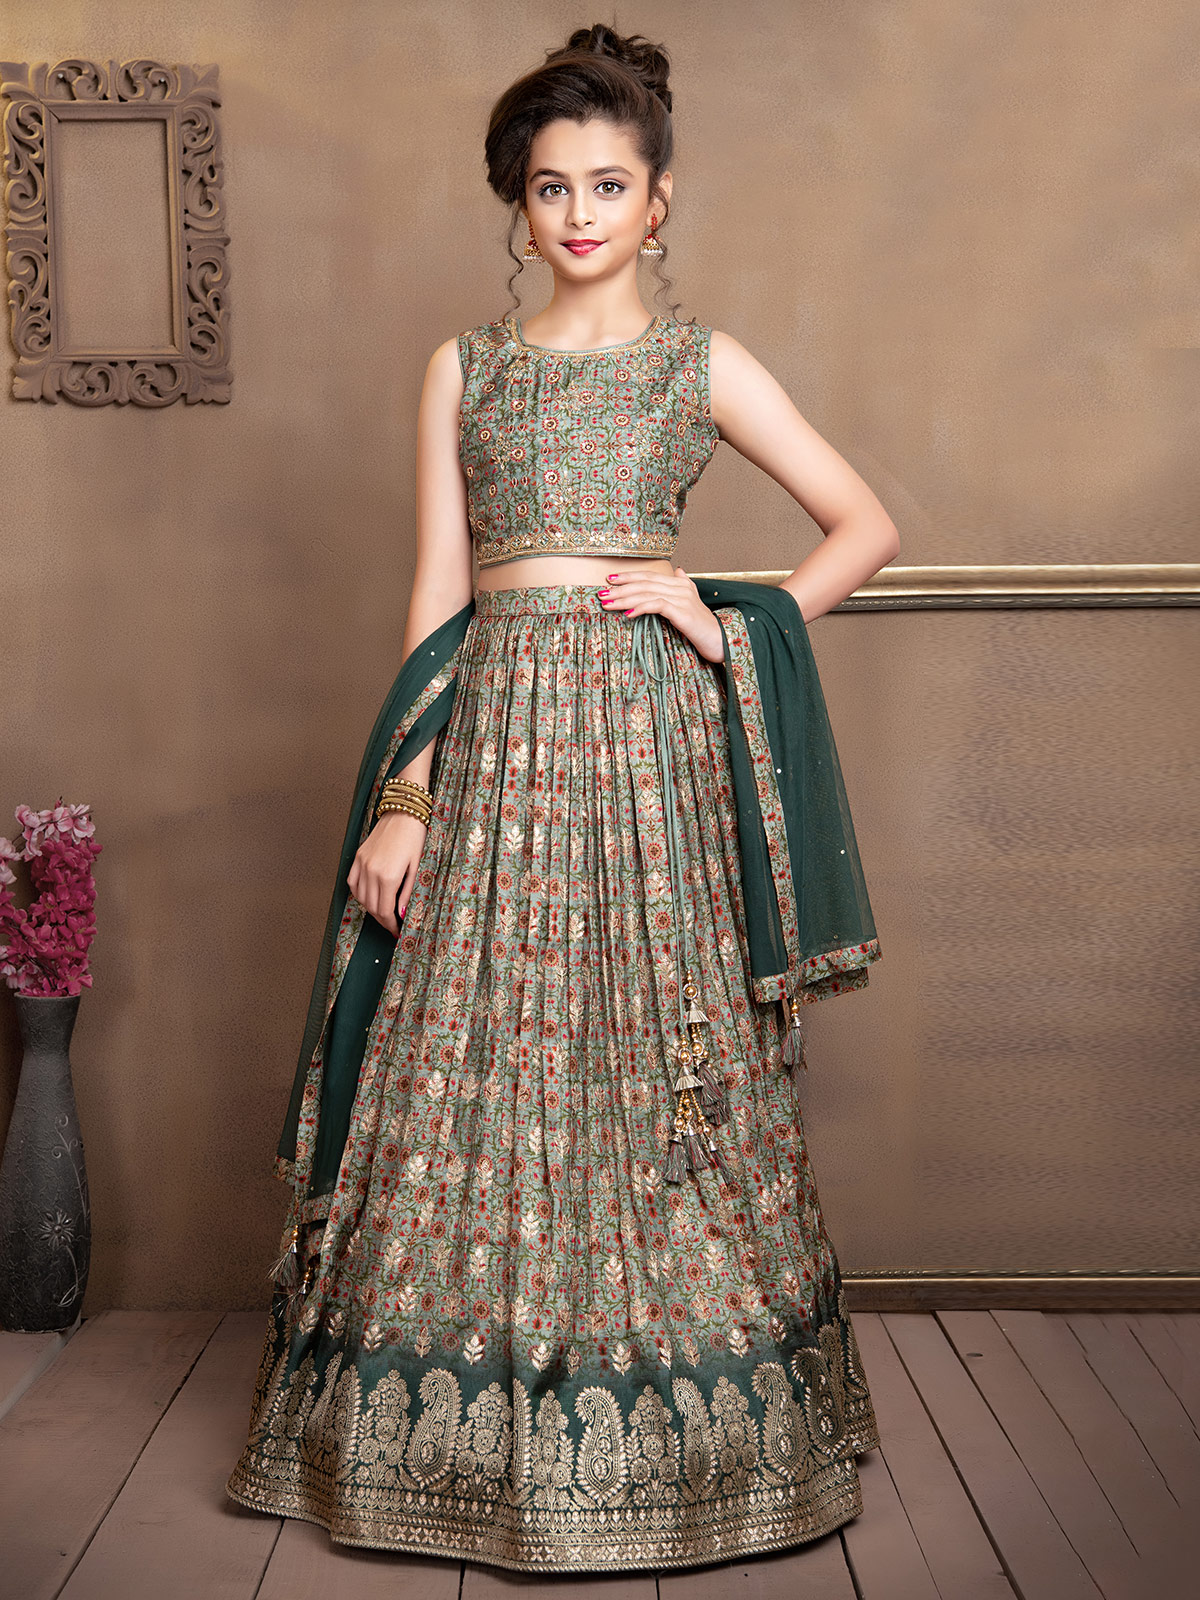 LIKE IMPORTED CRAZE GIRLS LEHENGA CHOLI at Rs.997/Piece in surat offer by  Arya Dress Maker Surat